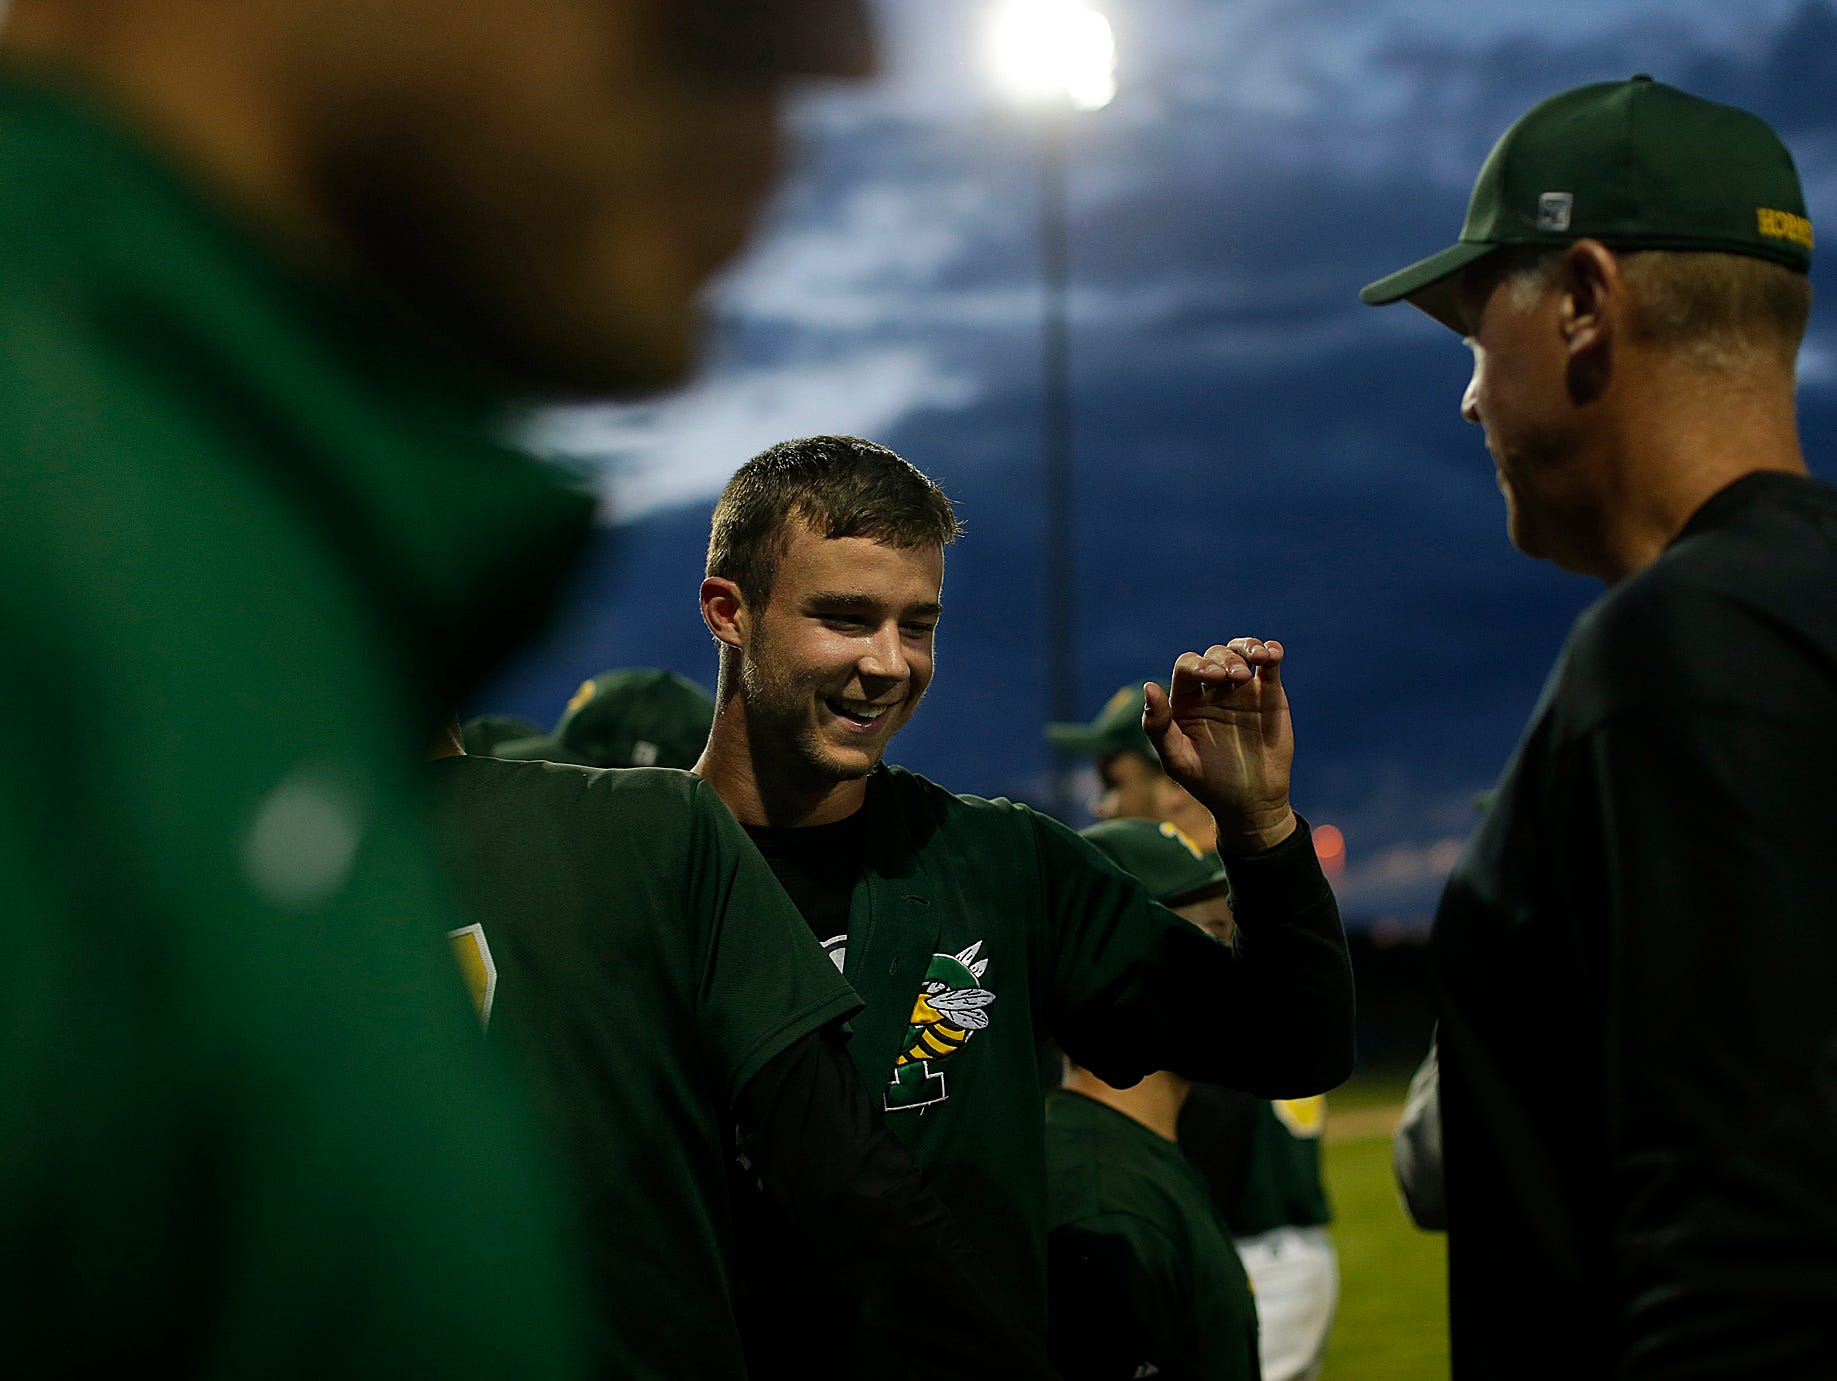 Green Bay Preble pitcher Caleb Schoenholz is congratulated by his coaches after throwing a no-hitter against Green Bay West/East during a WIAA Division 1 sectional finals in June at Bay Port High School in Suamico.